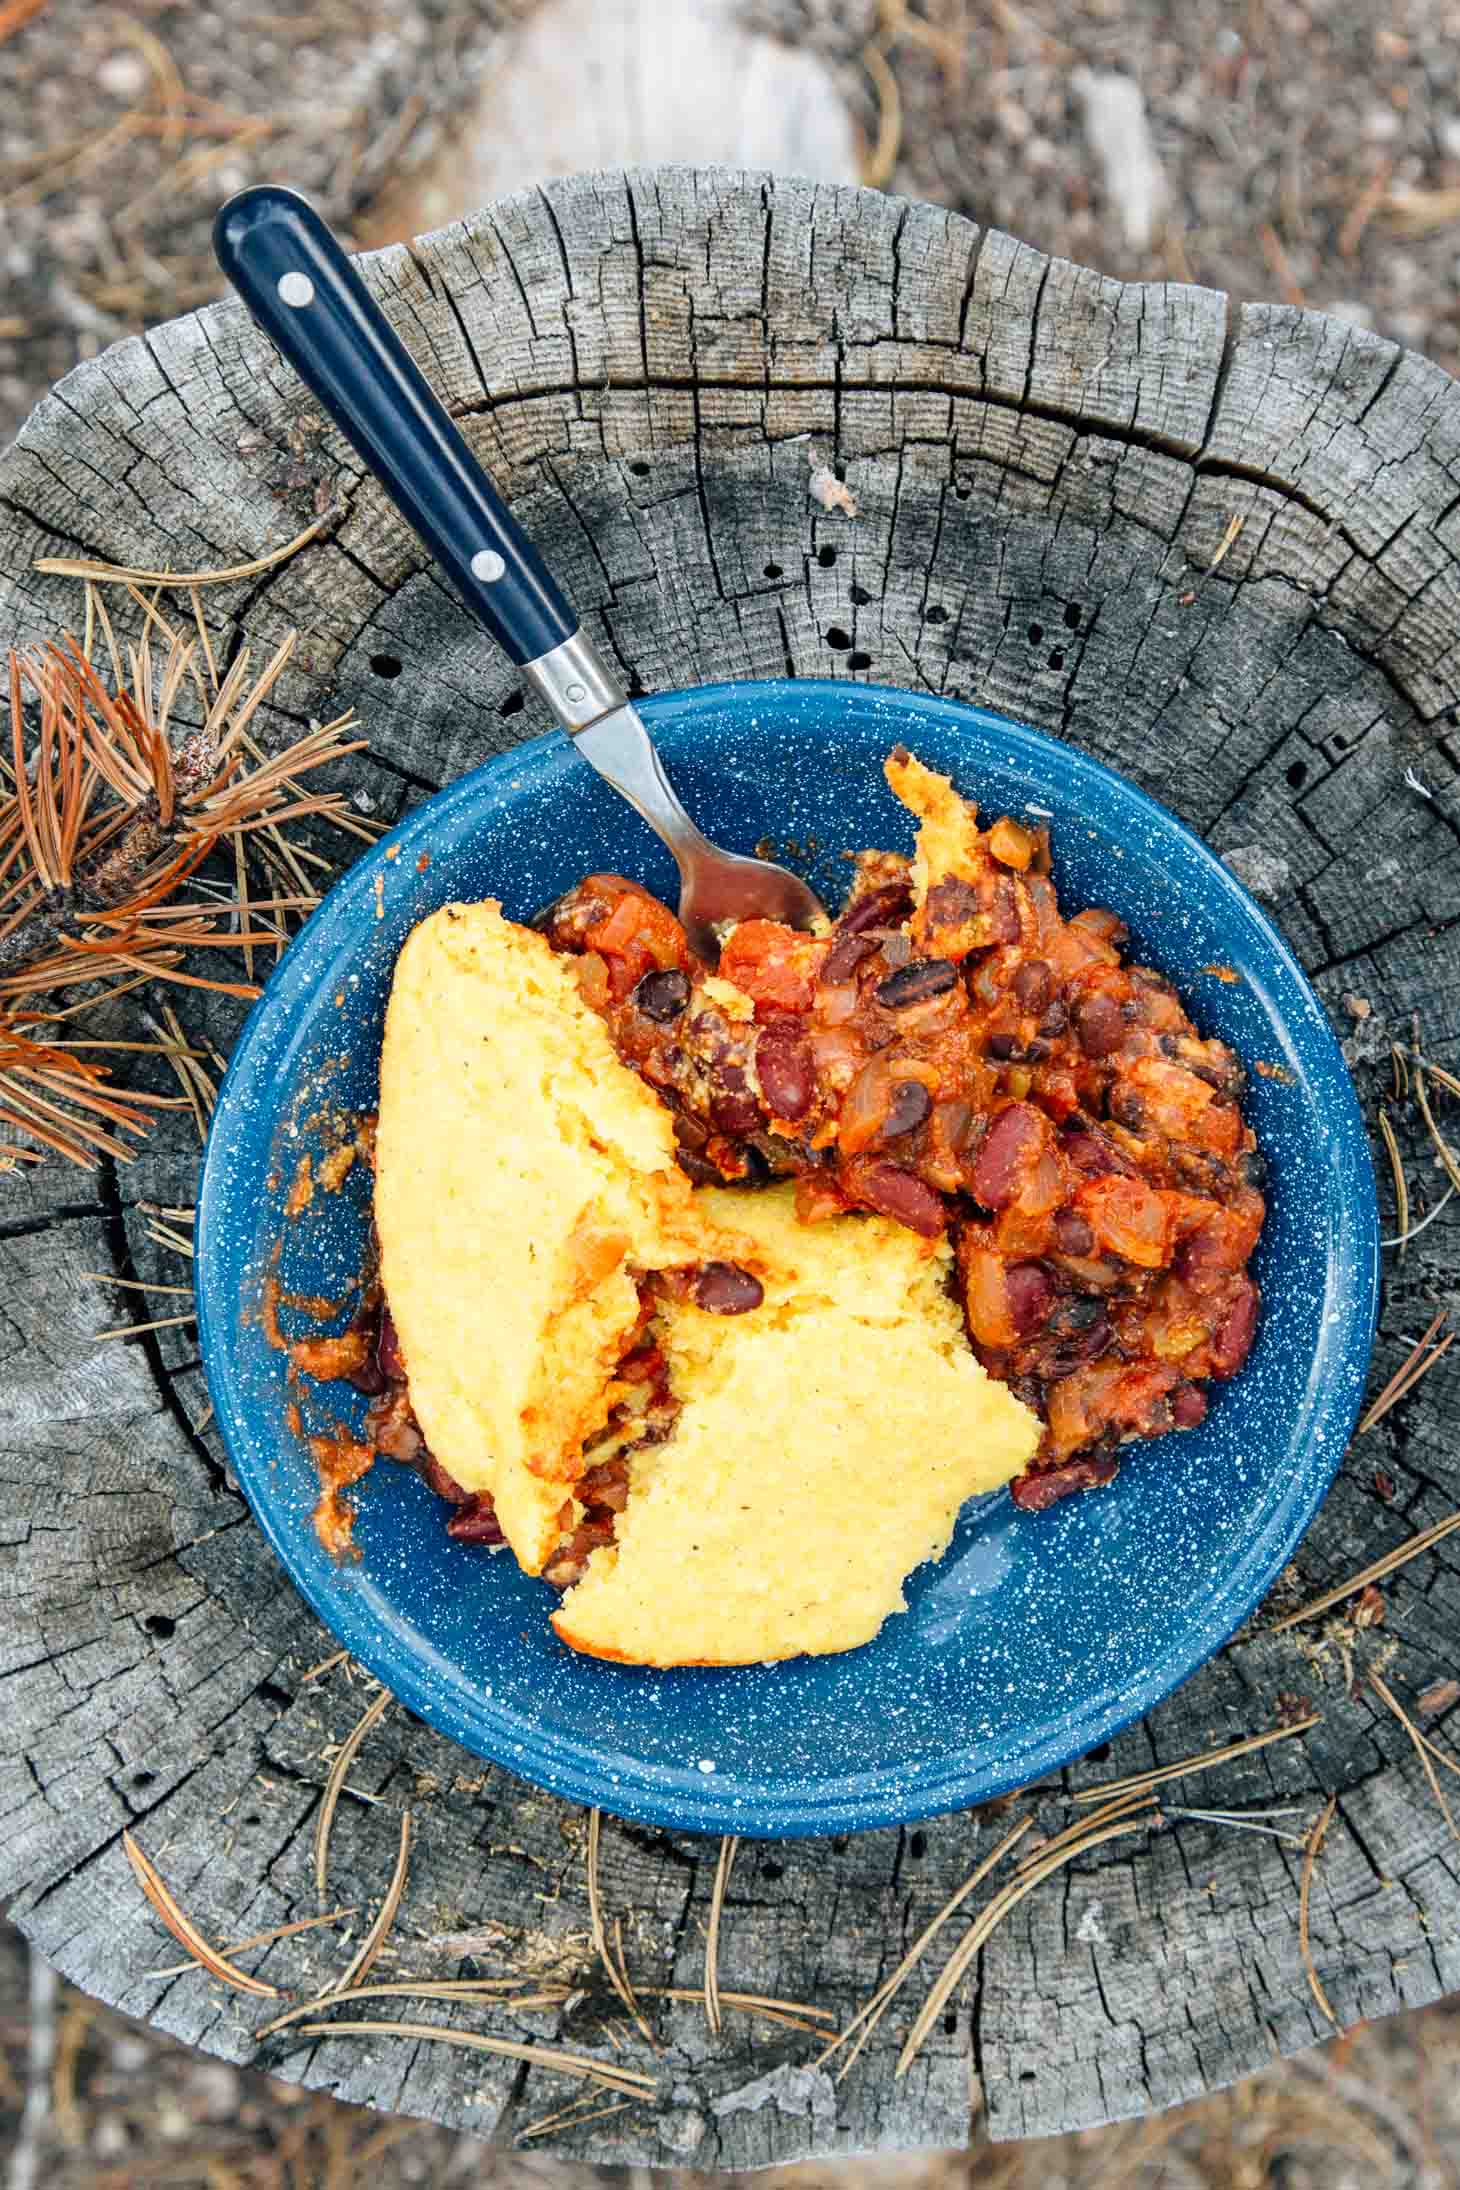 Chili and cornbread in a blue camping bowl on a stump.